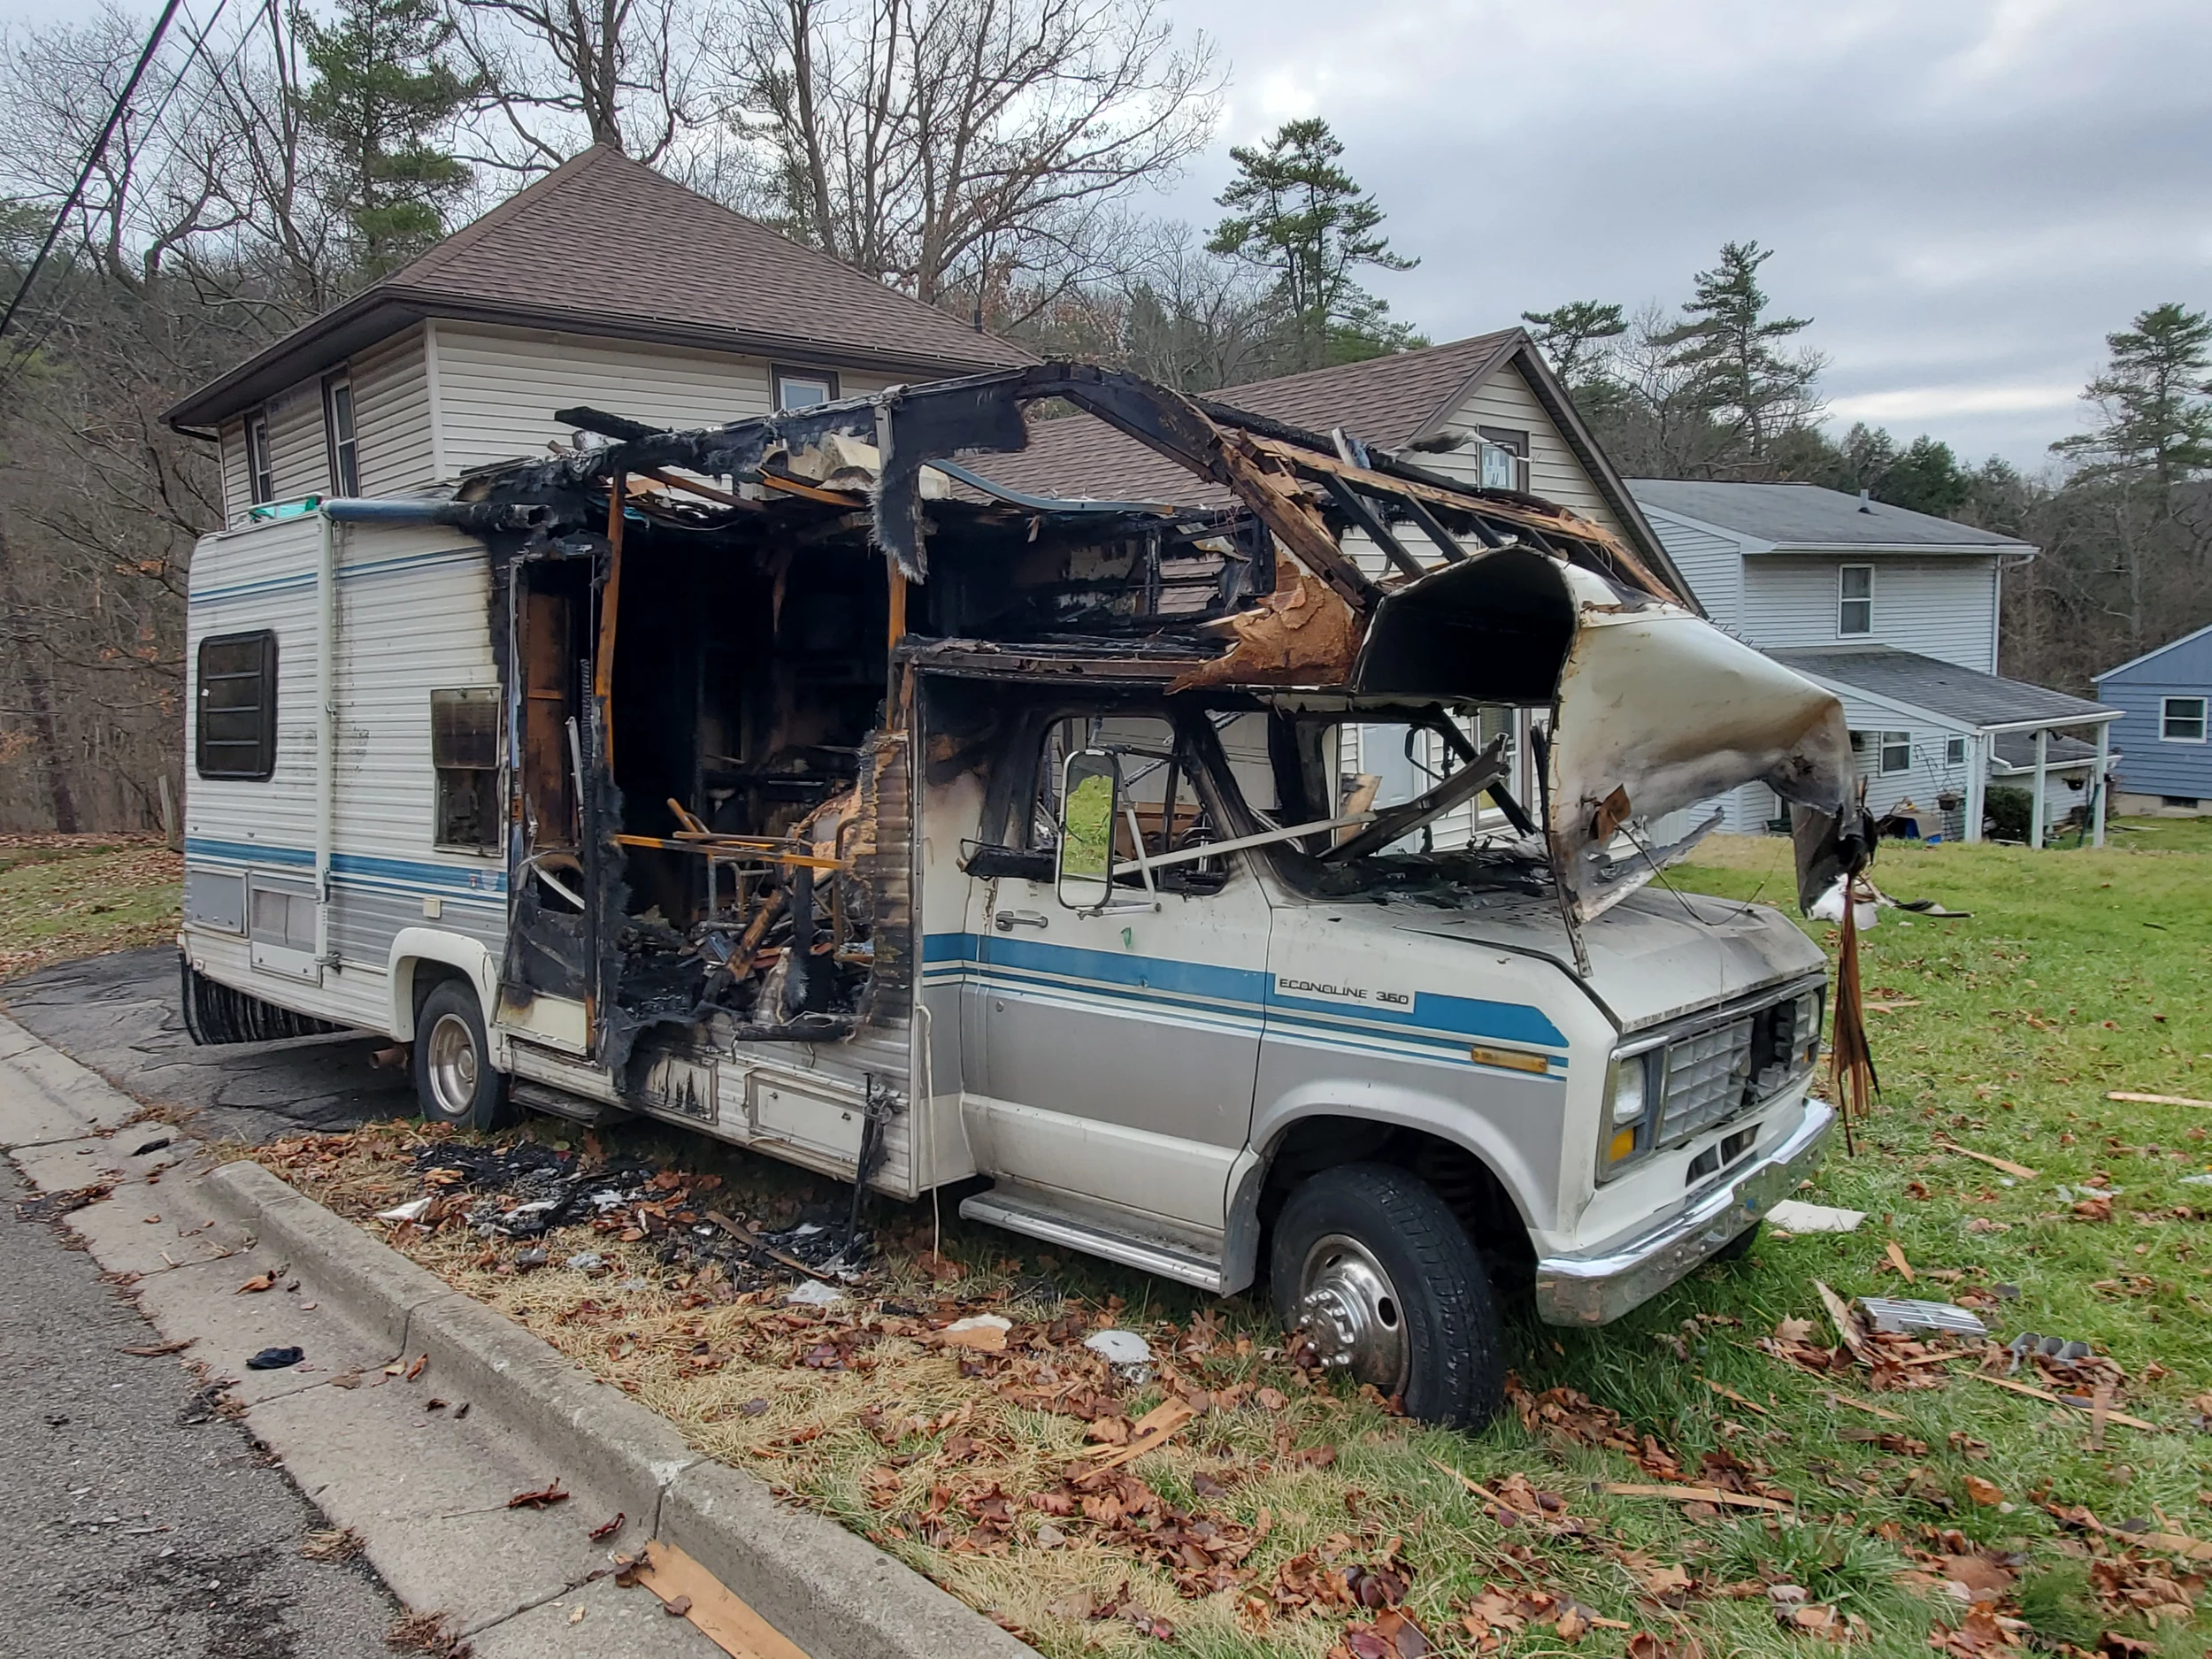 Residents Near Ross Park Want Burnt-Out RV Eyesore Hauled Away image pic photo